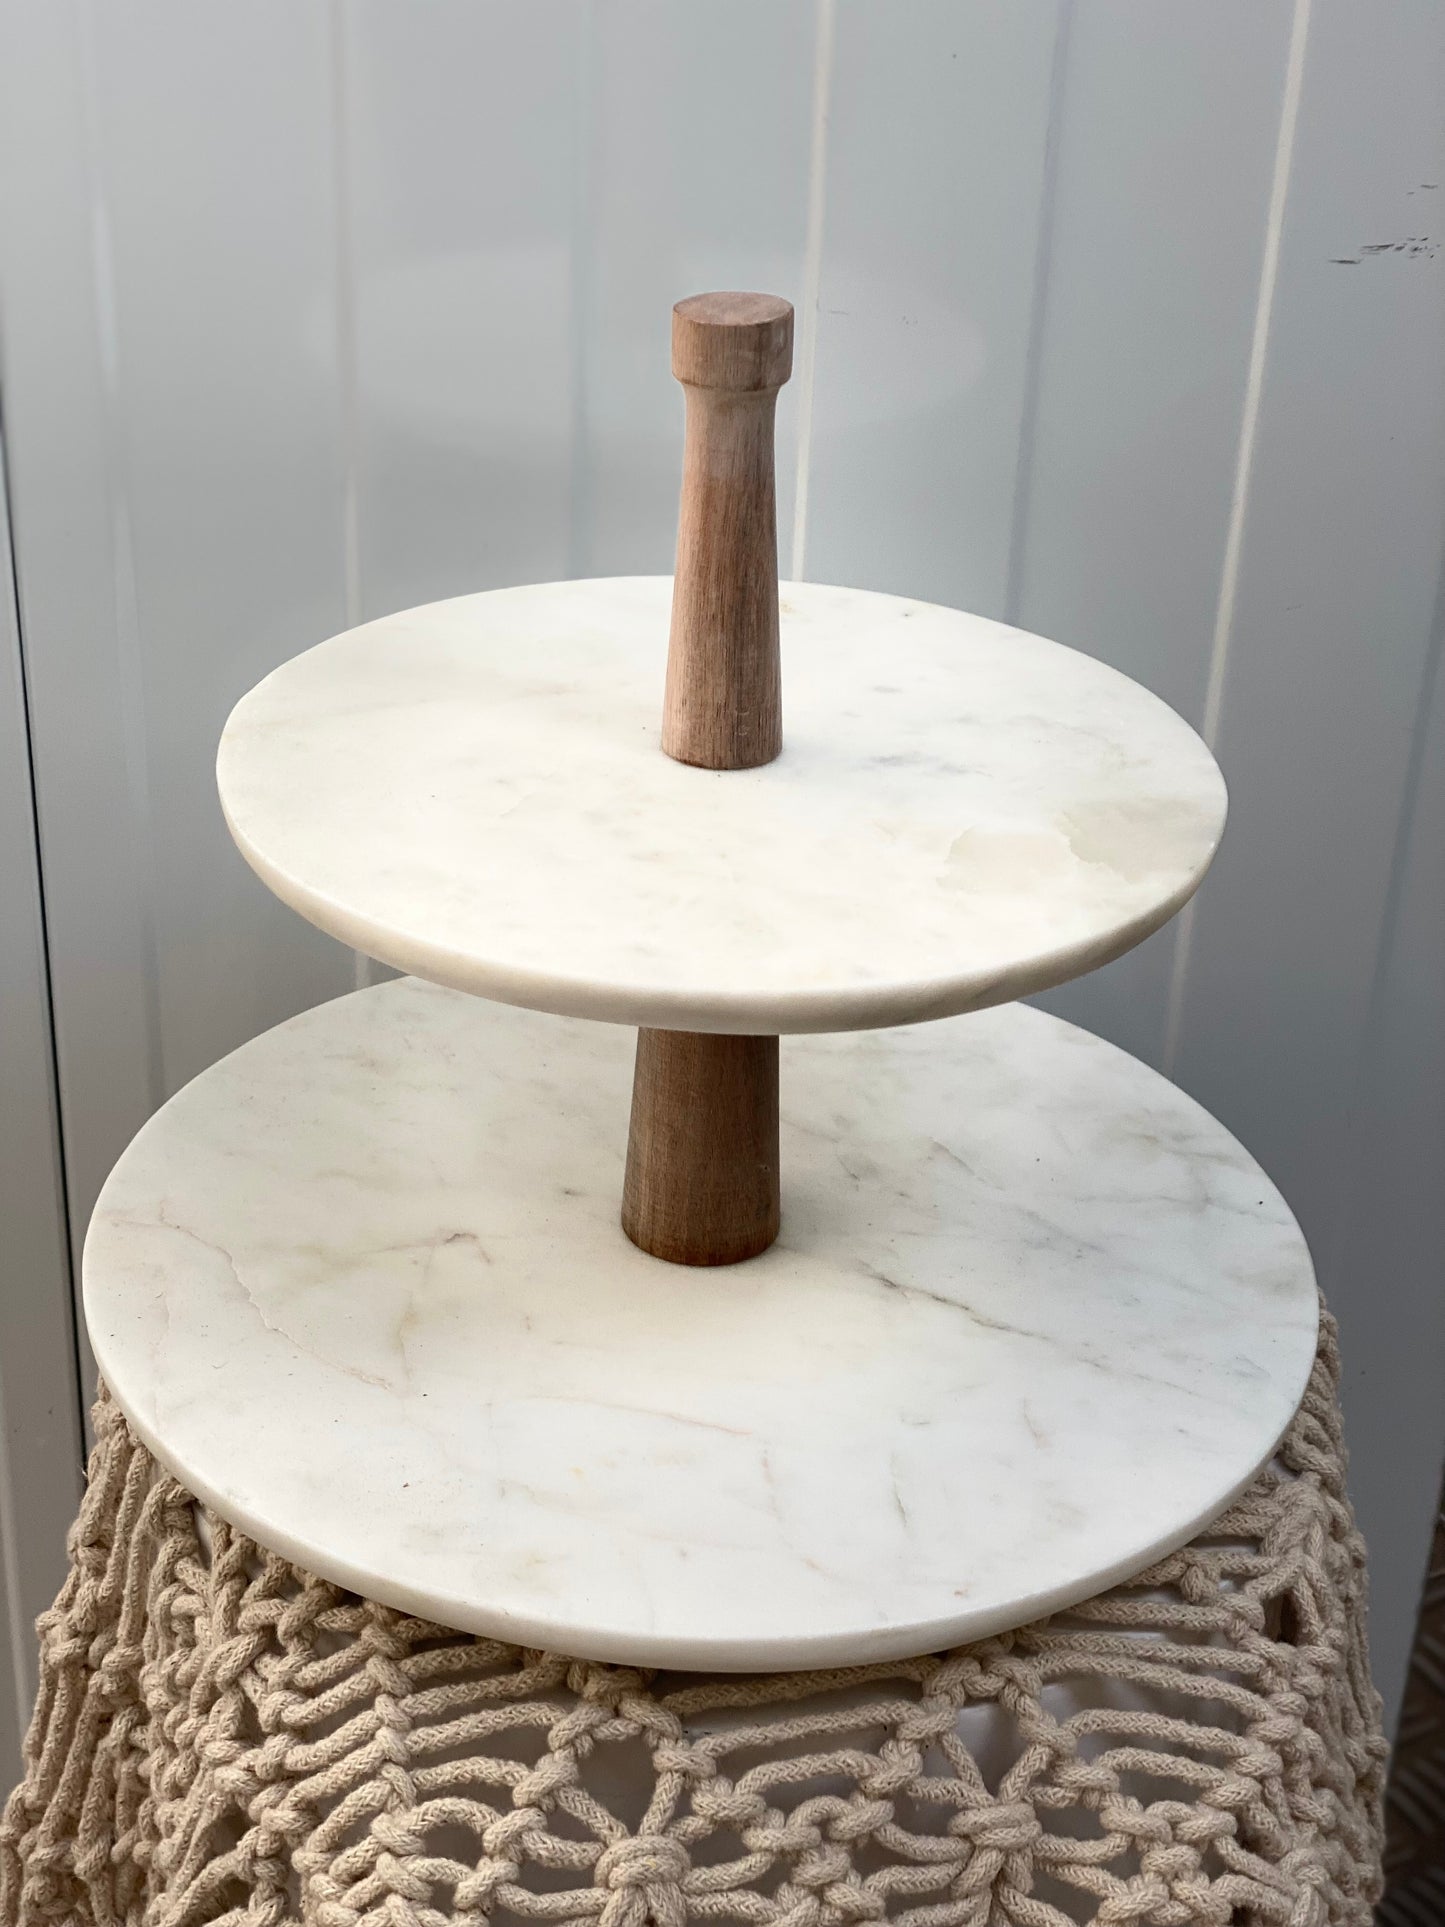 2 Tier Cake Stands